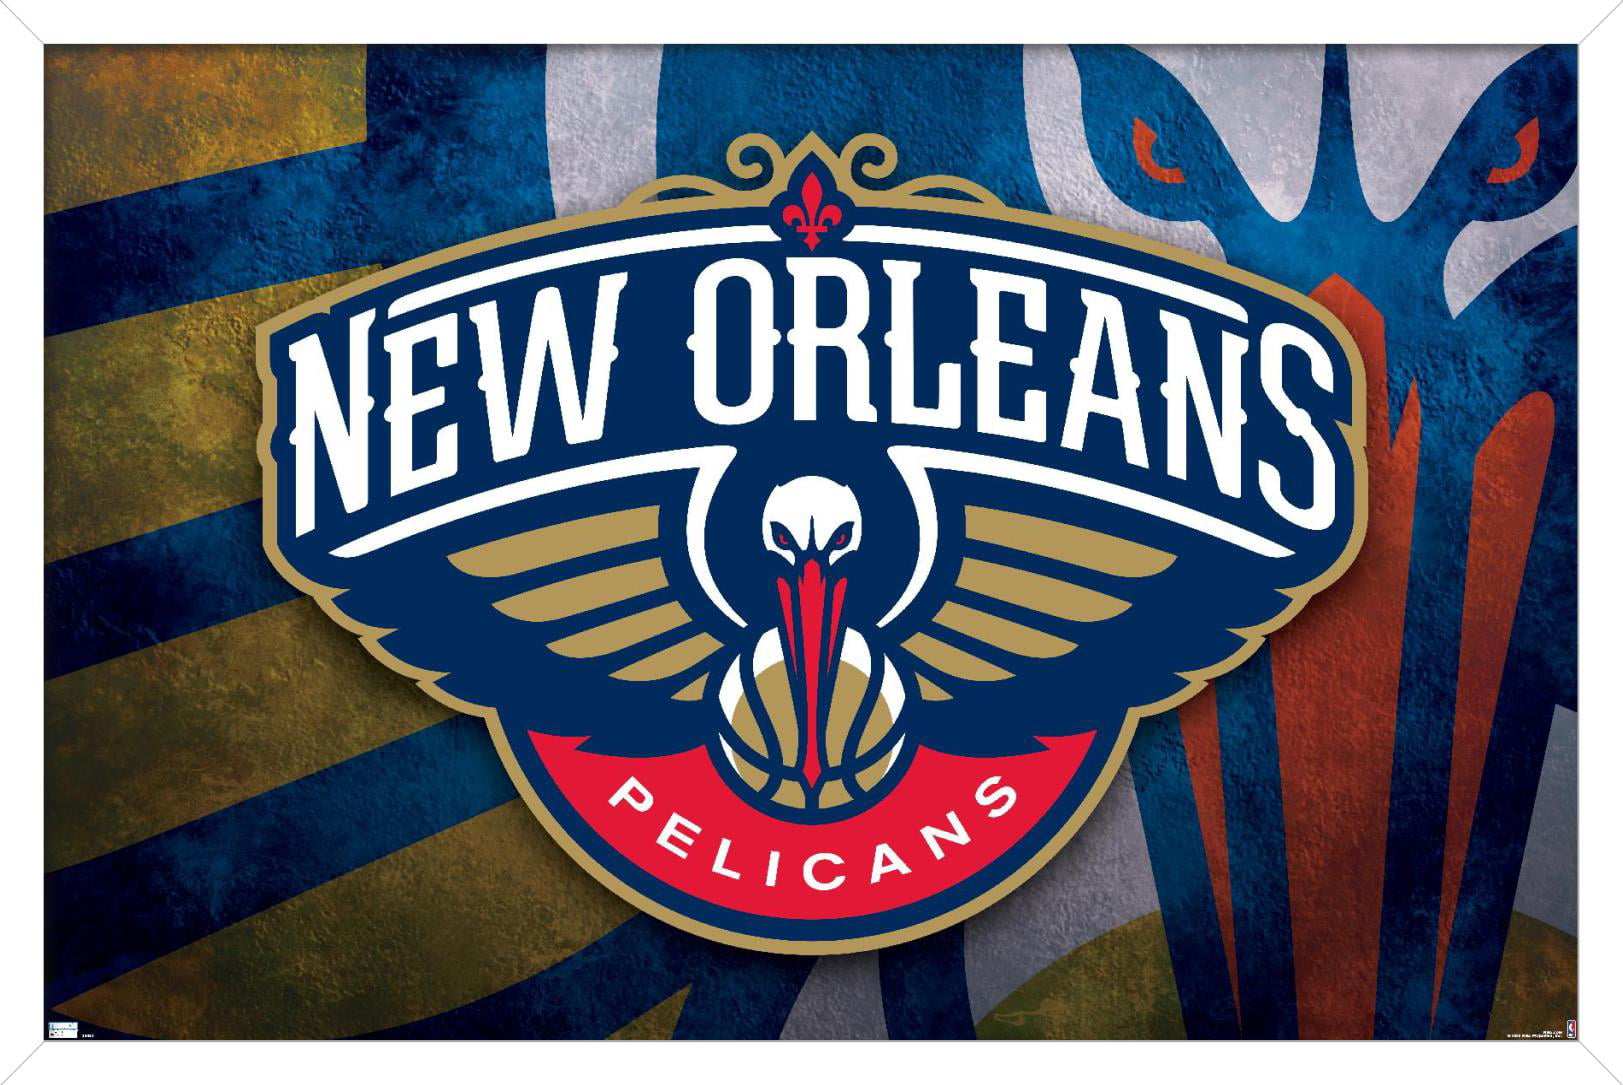 NBA New Orleans Pelicans - Logo 20 Wall Poster, 14.725 x 22.375, Framed 